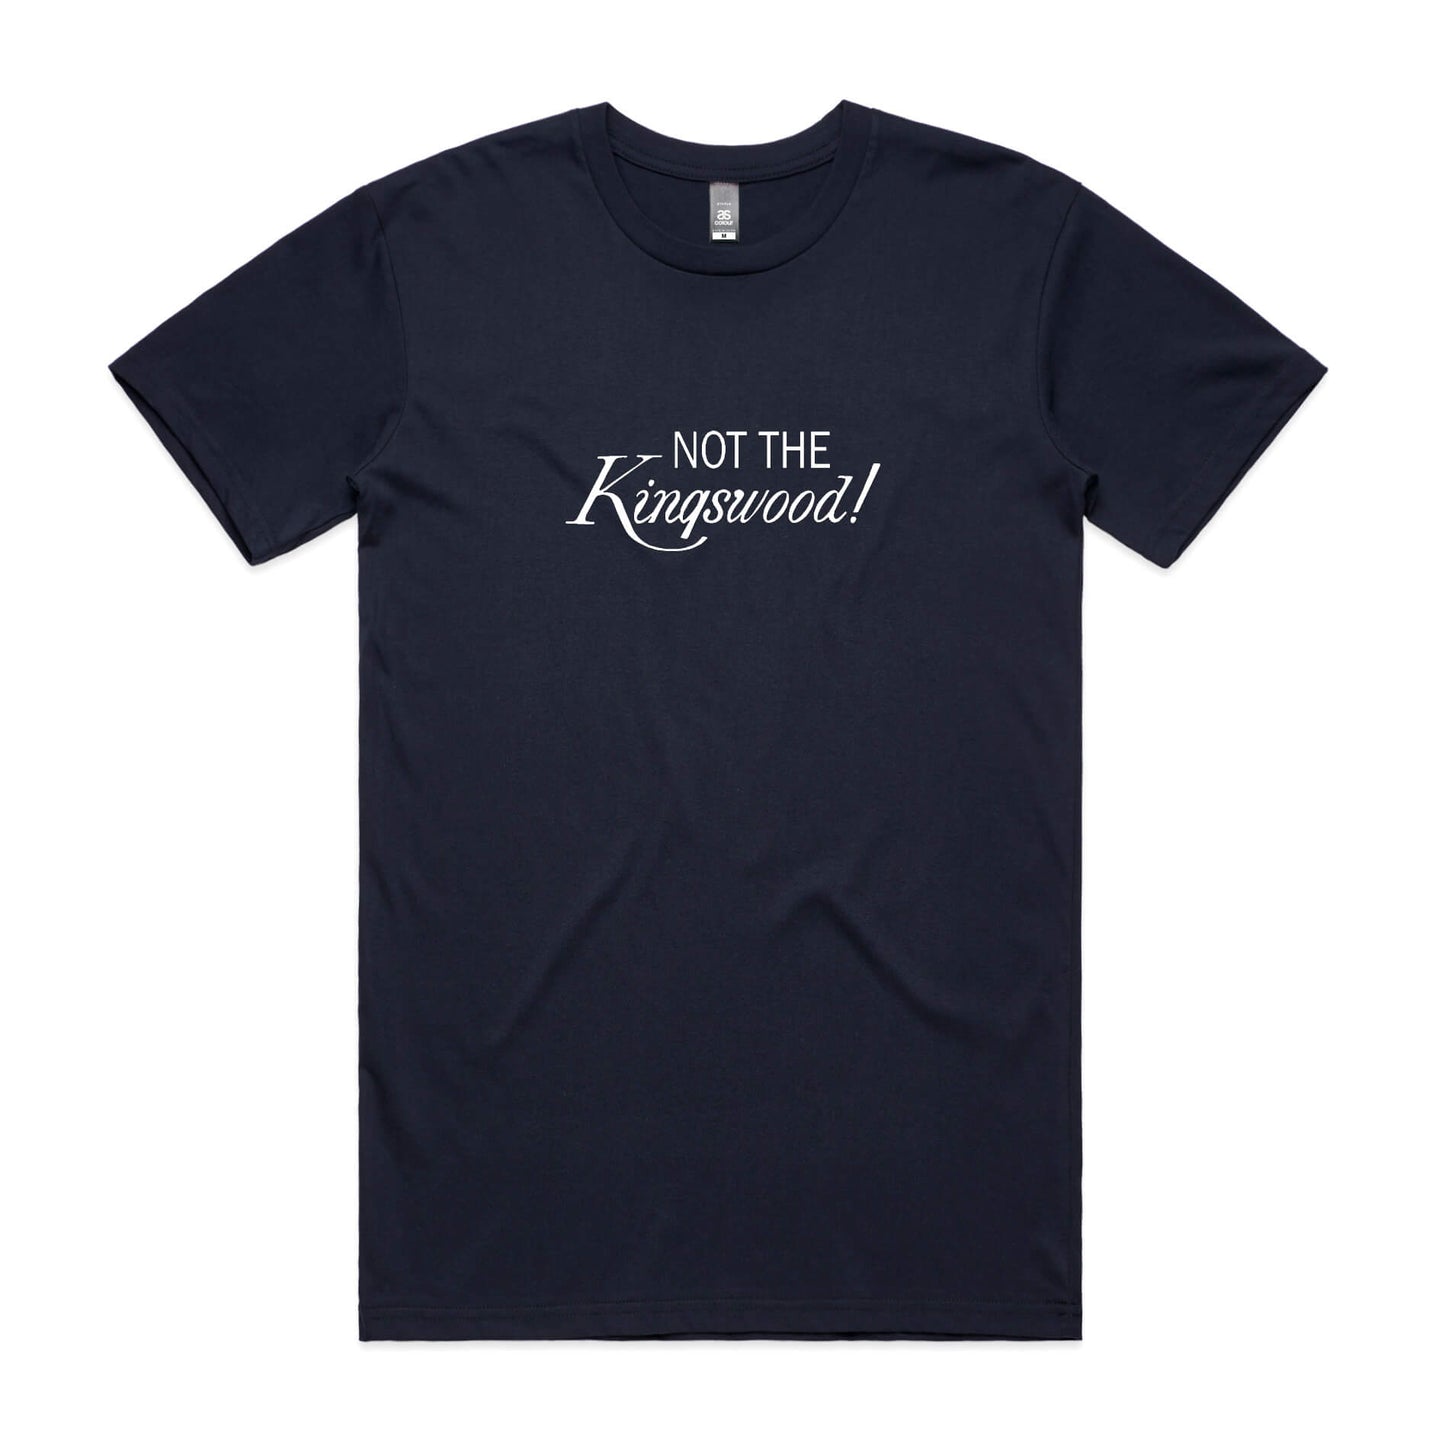 Not the Kingswood t-shirt in navy blue